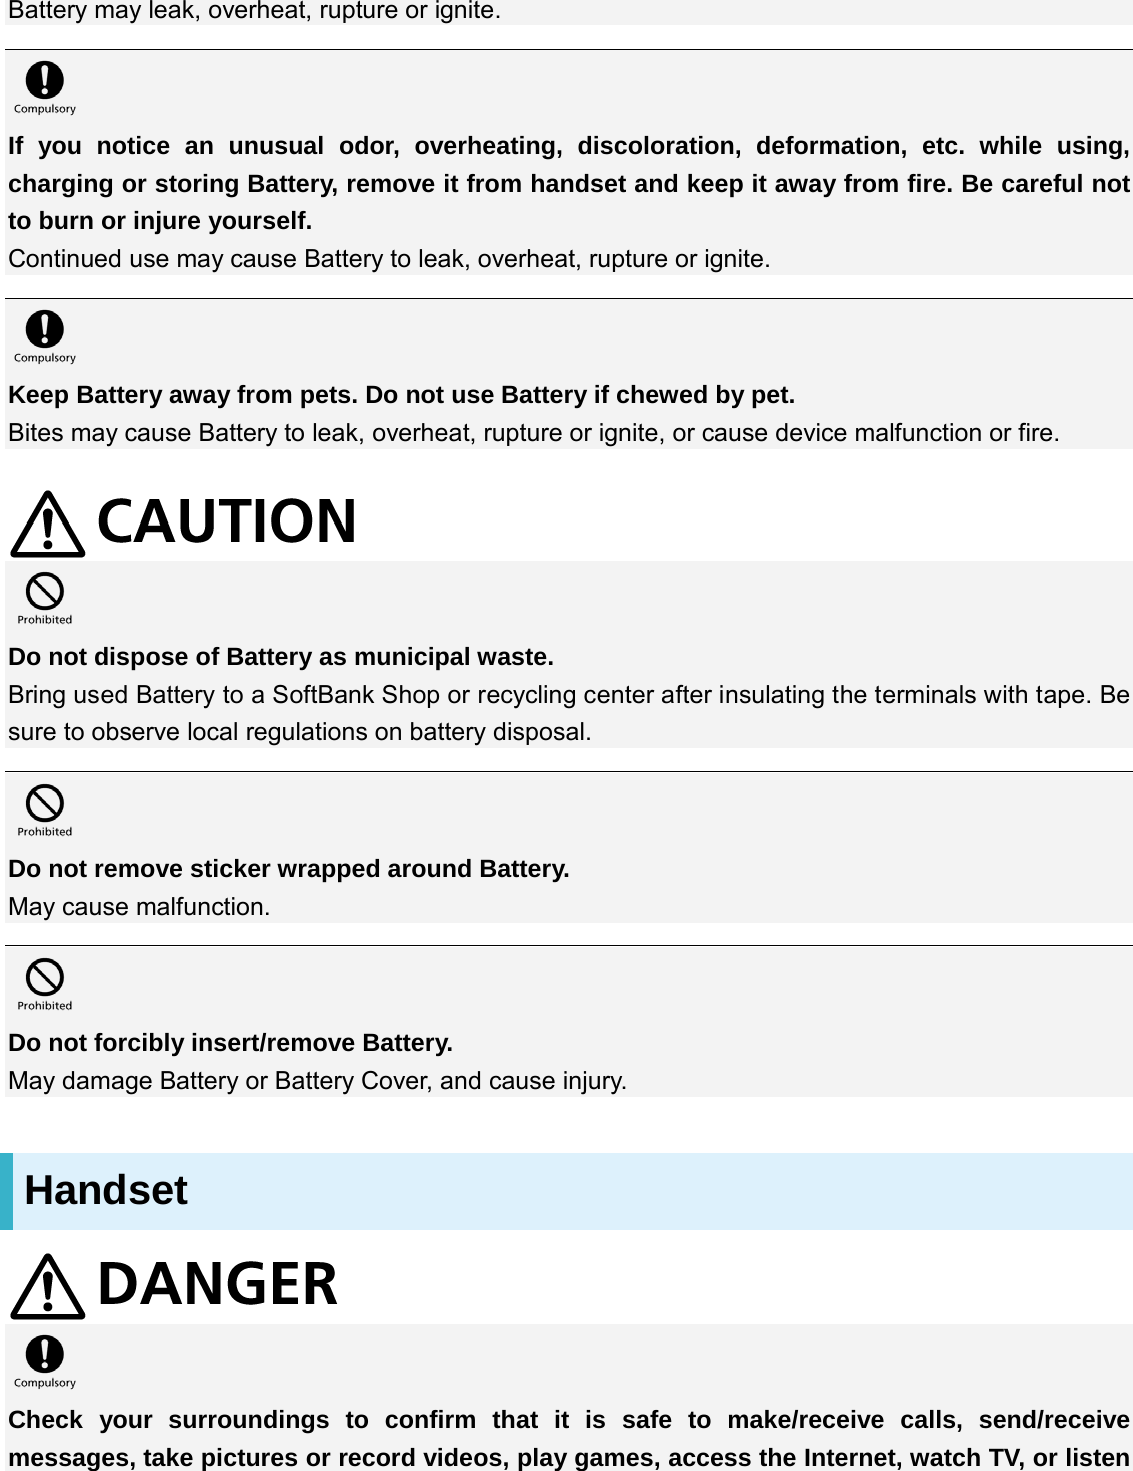 Battery may leak, overheat, rupture or ignite.   If you notice an unusual odor, overheating, discoloration, deformation, etc. while using, charging or storing Battery, remove it from handset and keep it away from fire. Be careful not to burn or injure yourself. Continued use may cause Battery to leak, overheat, rupture or ignite.   Keep Battery away from pets. Do not use Battery if chewed by pet. Bites may cause Battery to leak, overheat, rupture or ignite, or cause device malfunction or fire.    Do not dispose of Battery as municipal waste. Bring used Battery to a SoftBank Shop or recycling center after insulating the terminals with tape. Be sure to observe local regulations on battery disposal.   Do not remove sticker wrapped around Battery. May cause malfunction.   Do not forcibly insert/remove Battery. May damage Battery or Battery Cover, and cause injury. Handset   Check your surroundings to confirm that it is safe to make/receive calls, send/receive messages, take pictures or record videos, play games, access the Internet, watch TV, or listen 